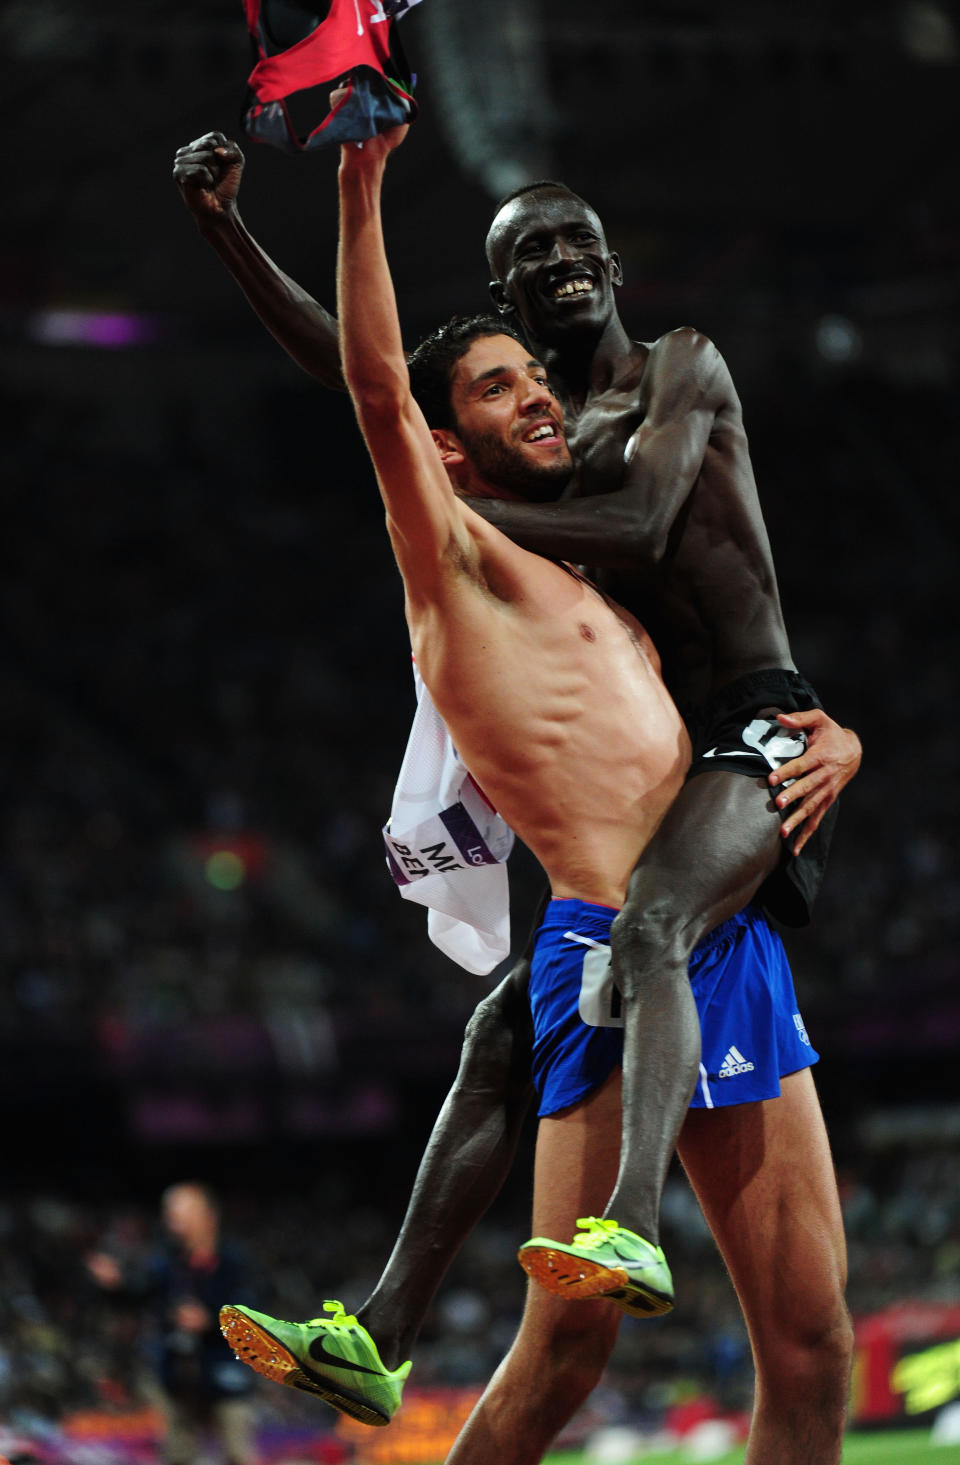 LONDON, ENGLAND - AUGUST 05: Silver medalist Mahiedine Mekhissi-Benabbad of France celebrates with gold medalist Ezekiel Kemboi of Kenya celebrate after the Men's 3000m Steeplechase on Day 9 of the London 2012 Olympic Games at the Olympic Stadium on August 5, 2012 in London, England. (Photo by Stu Forster/Getty Images)